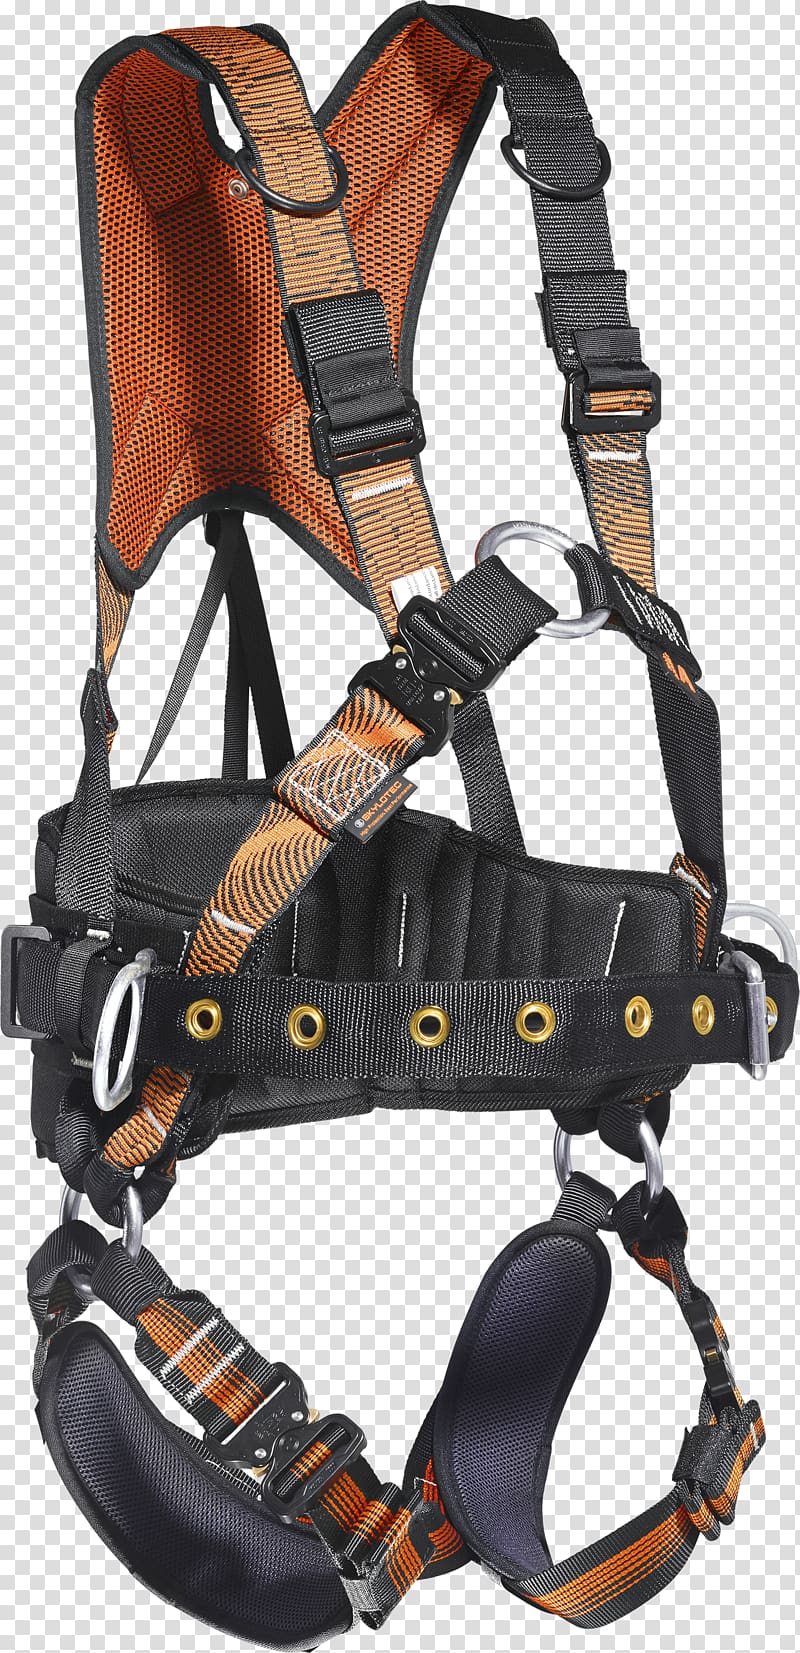 Climbing Harnesses Safety harness SKYLOTEC Belt Personal protective equipment, belt transparent background PNG clipart